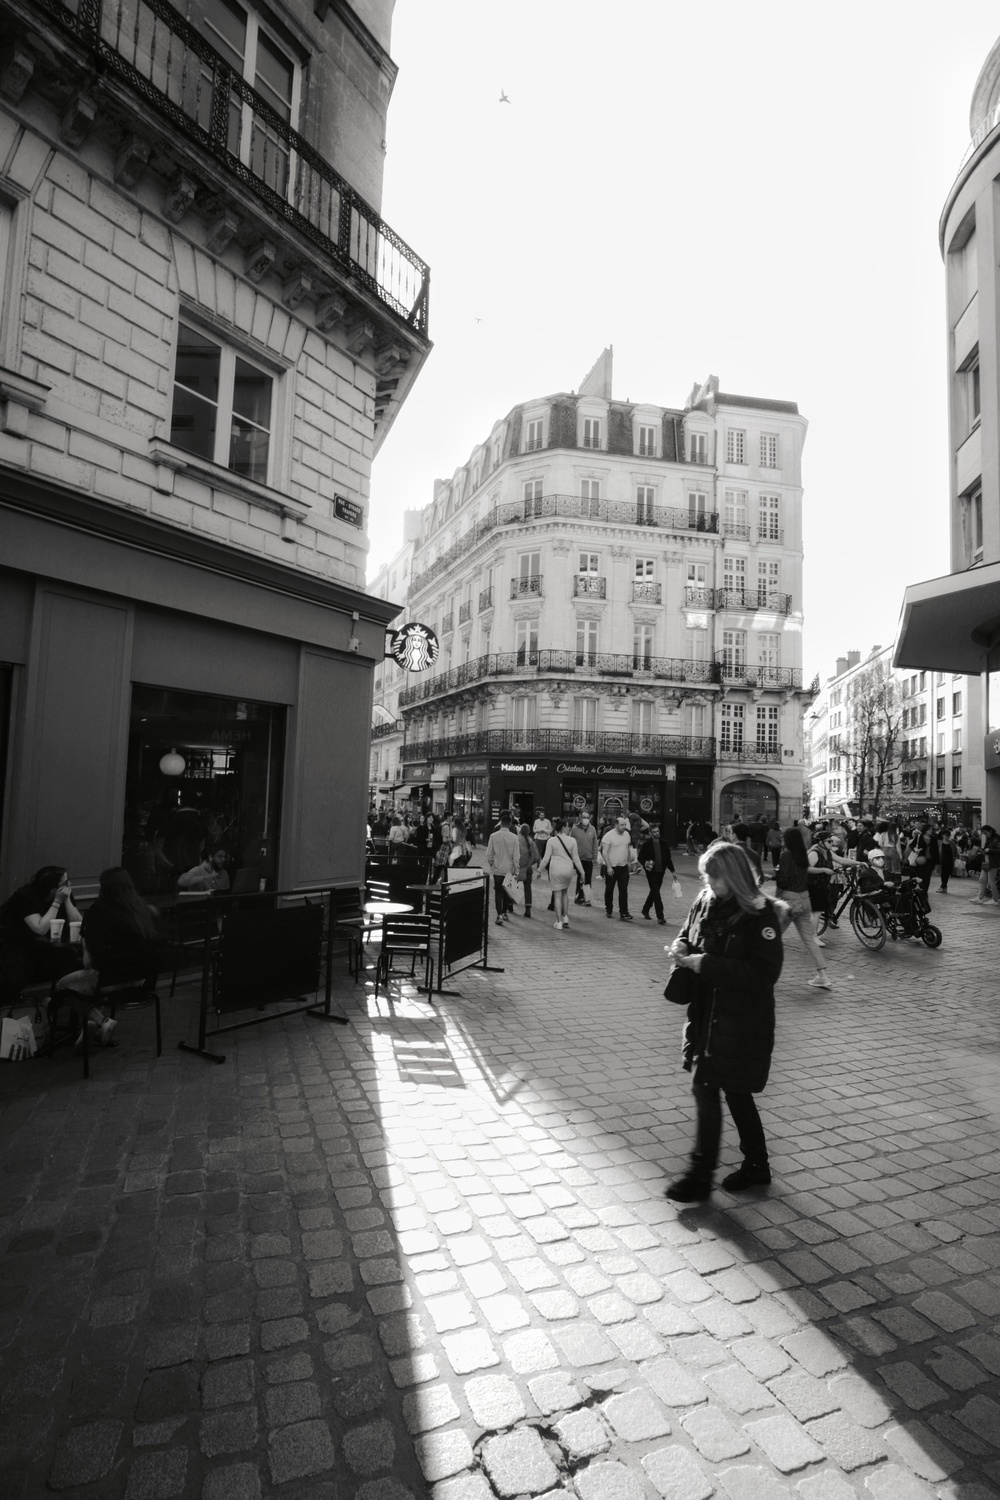 Starbucks in Nantes with some nice shadows